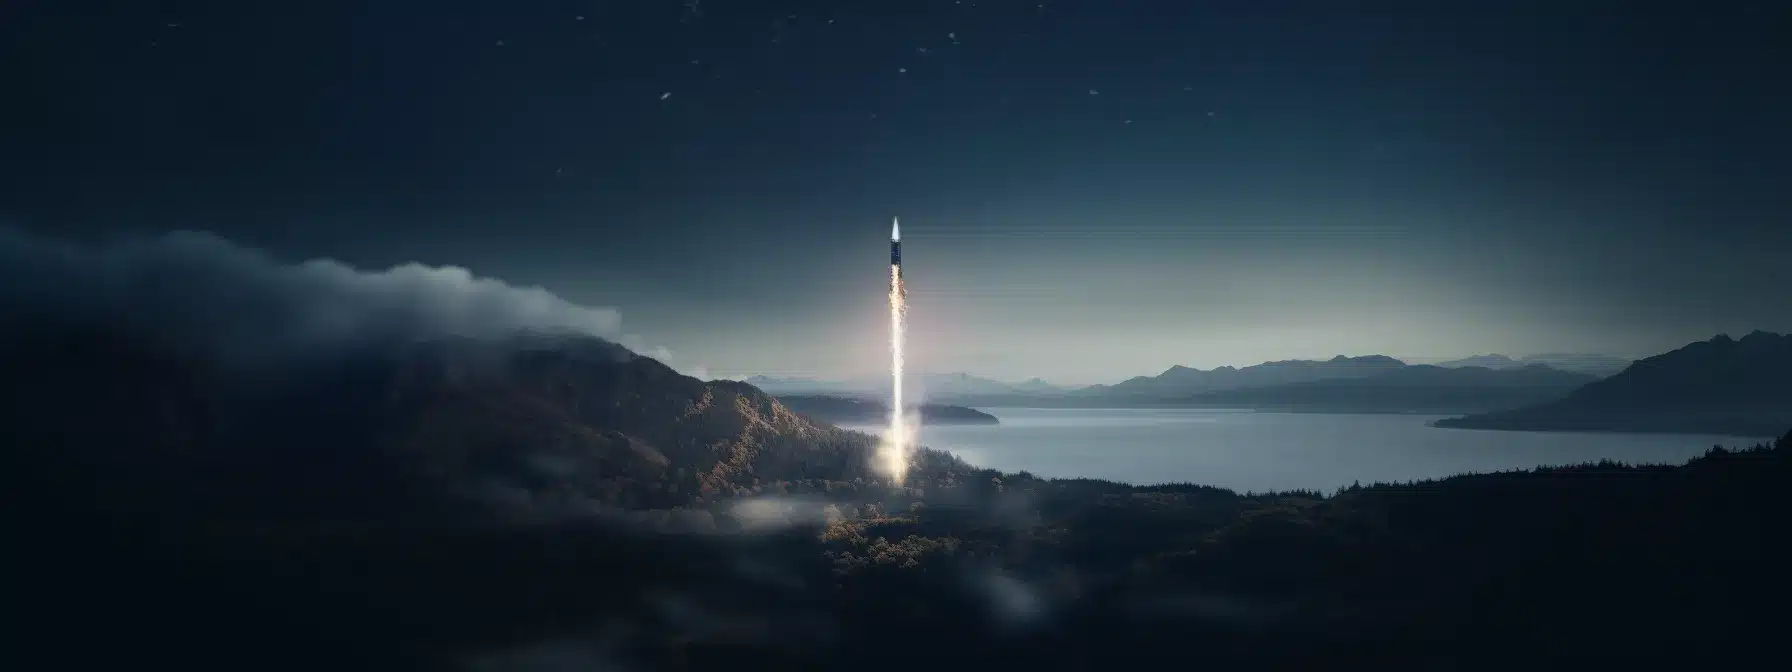 A Rocket Launching Into The Night Sky With Constellations Forming A Path Towards Customer Satisfaction.